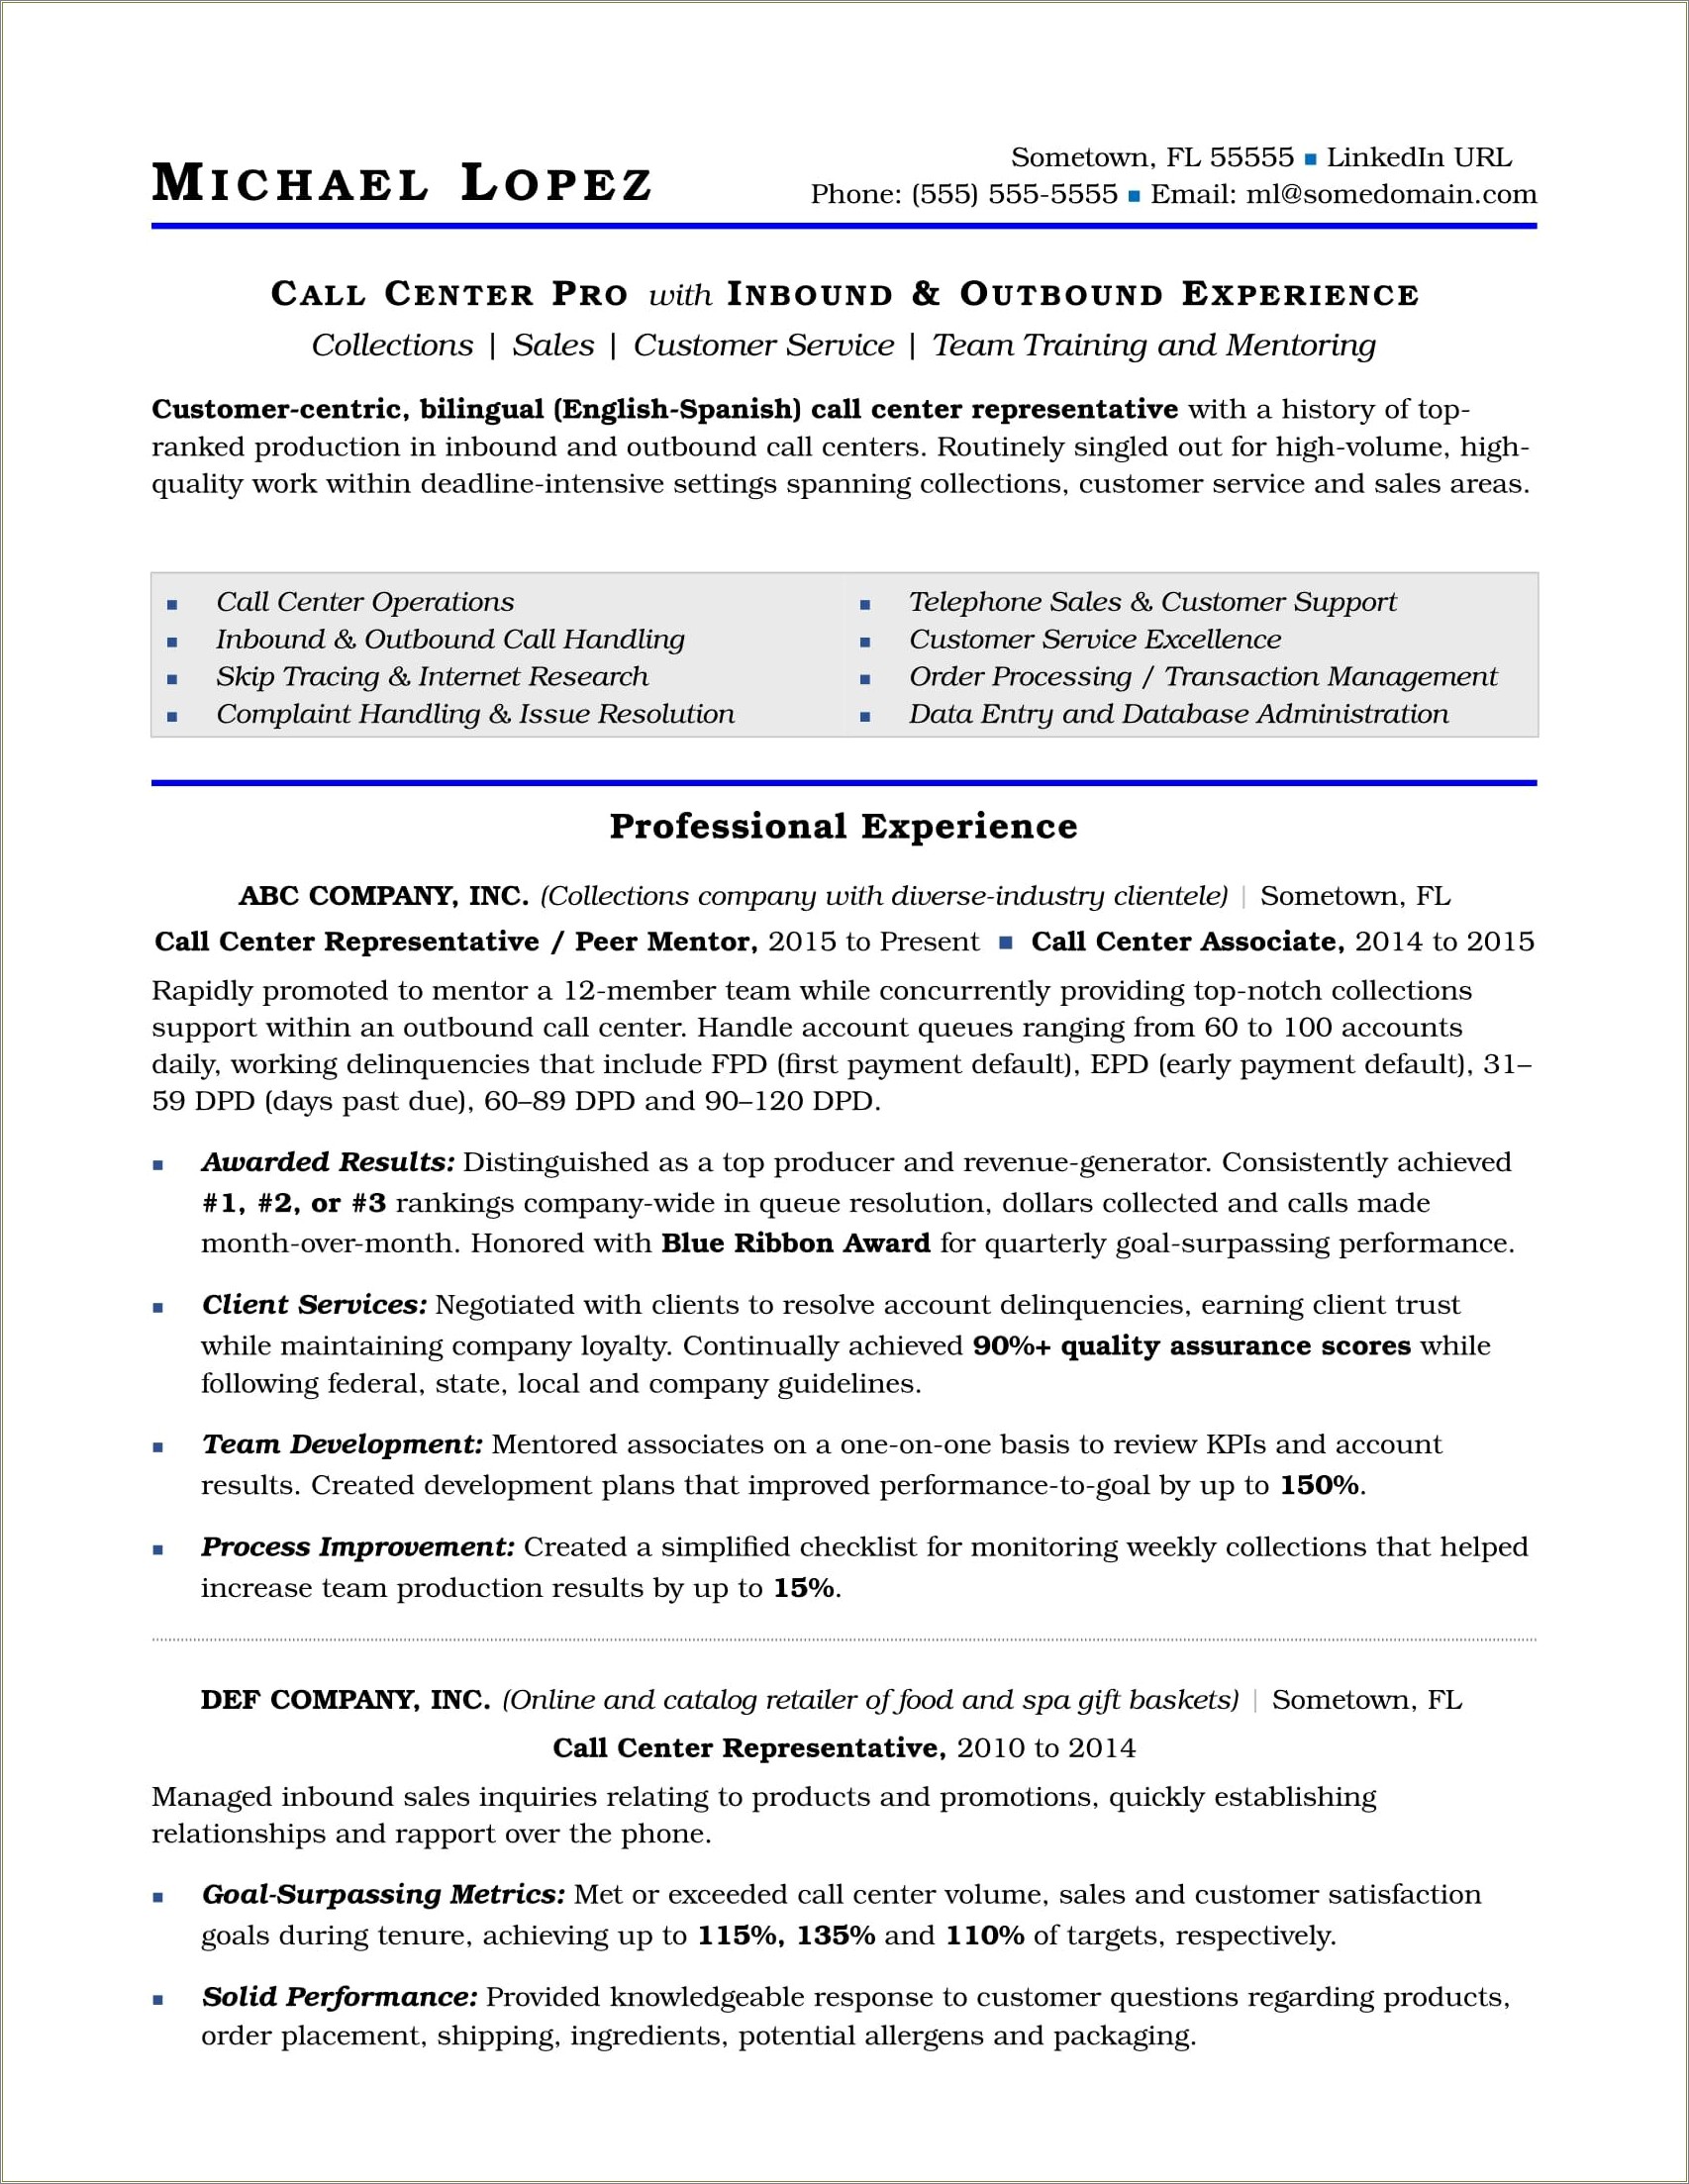 penn career services resume review